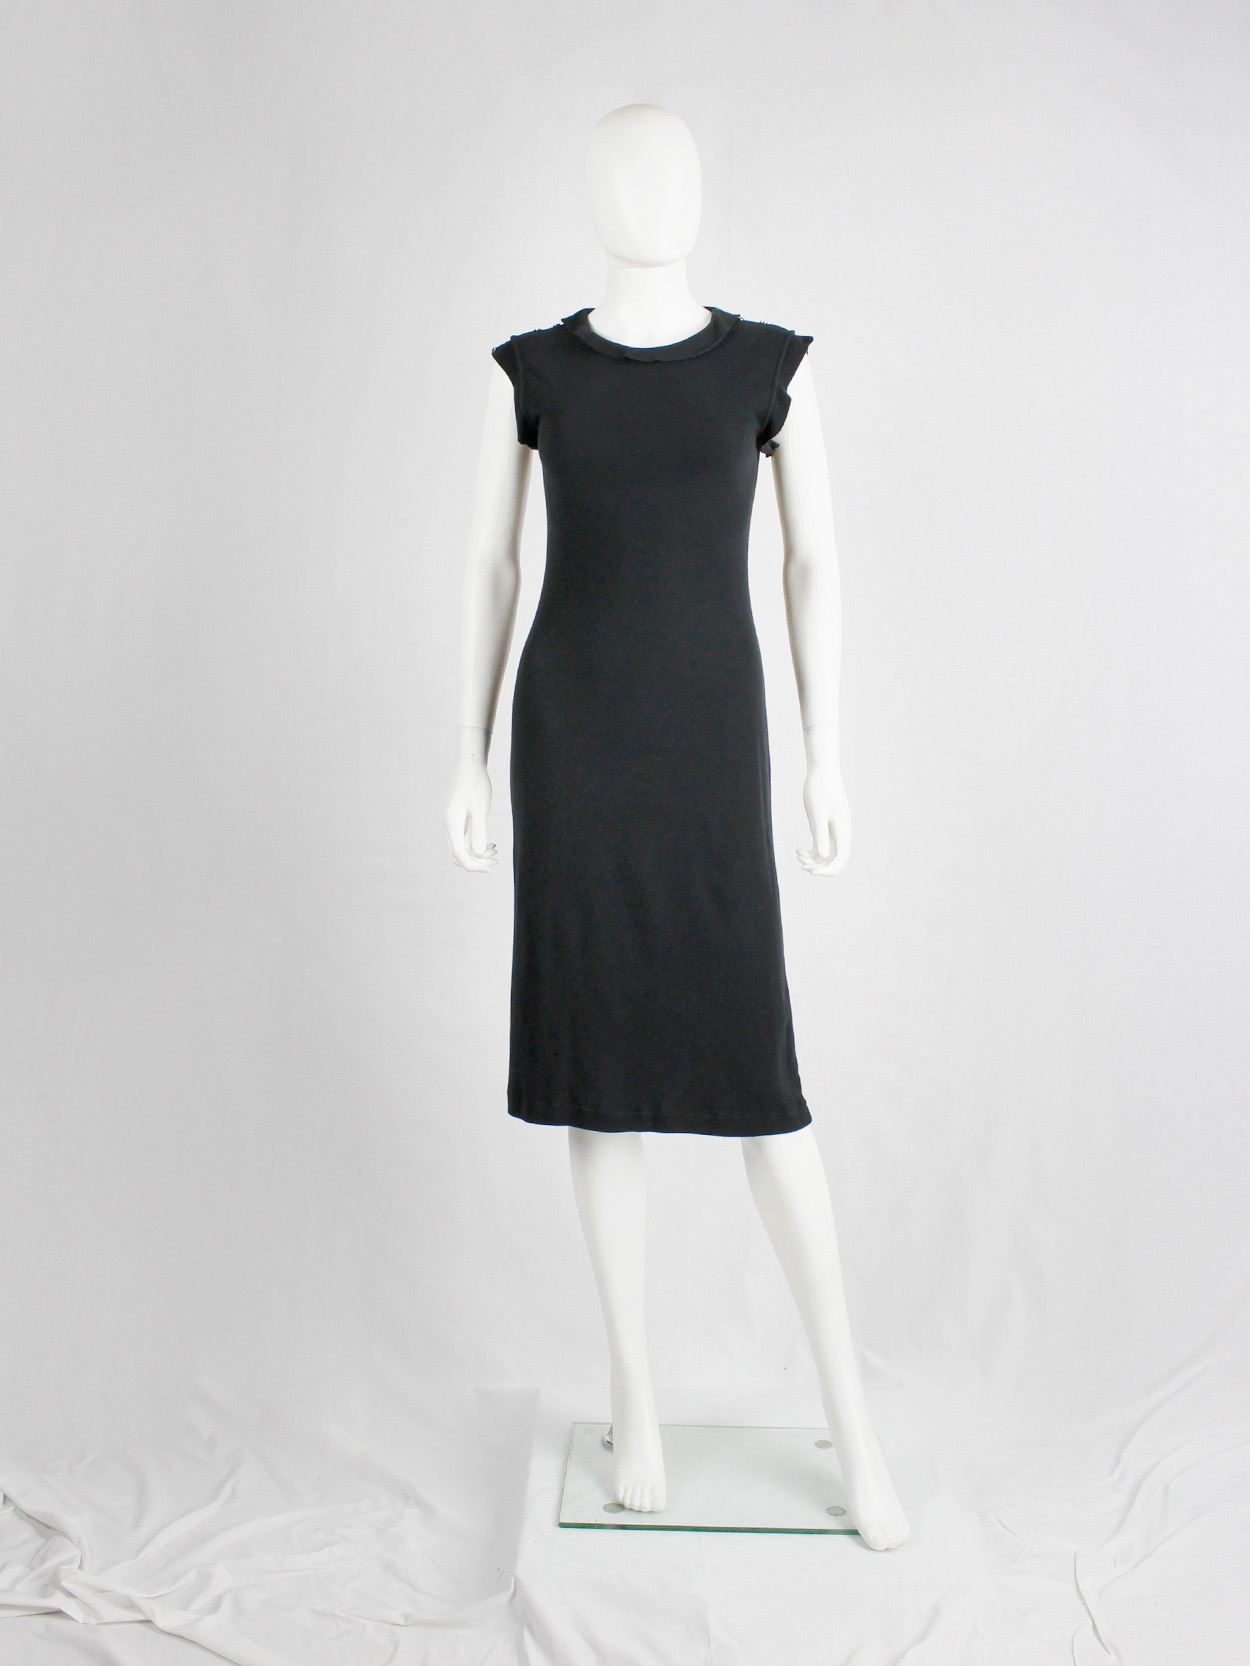 Maison Martin Margiela reproduction of a 1993 black dress with shoulder snap buttons (10)